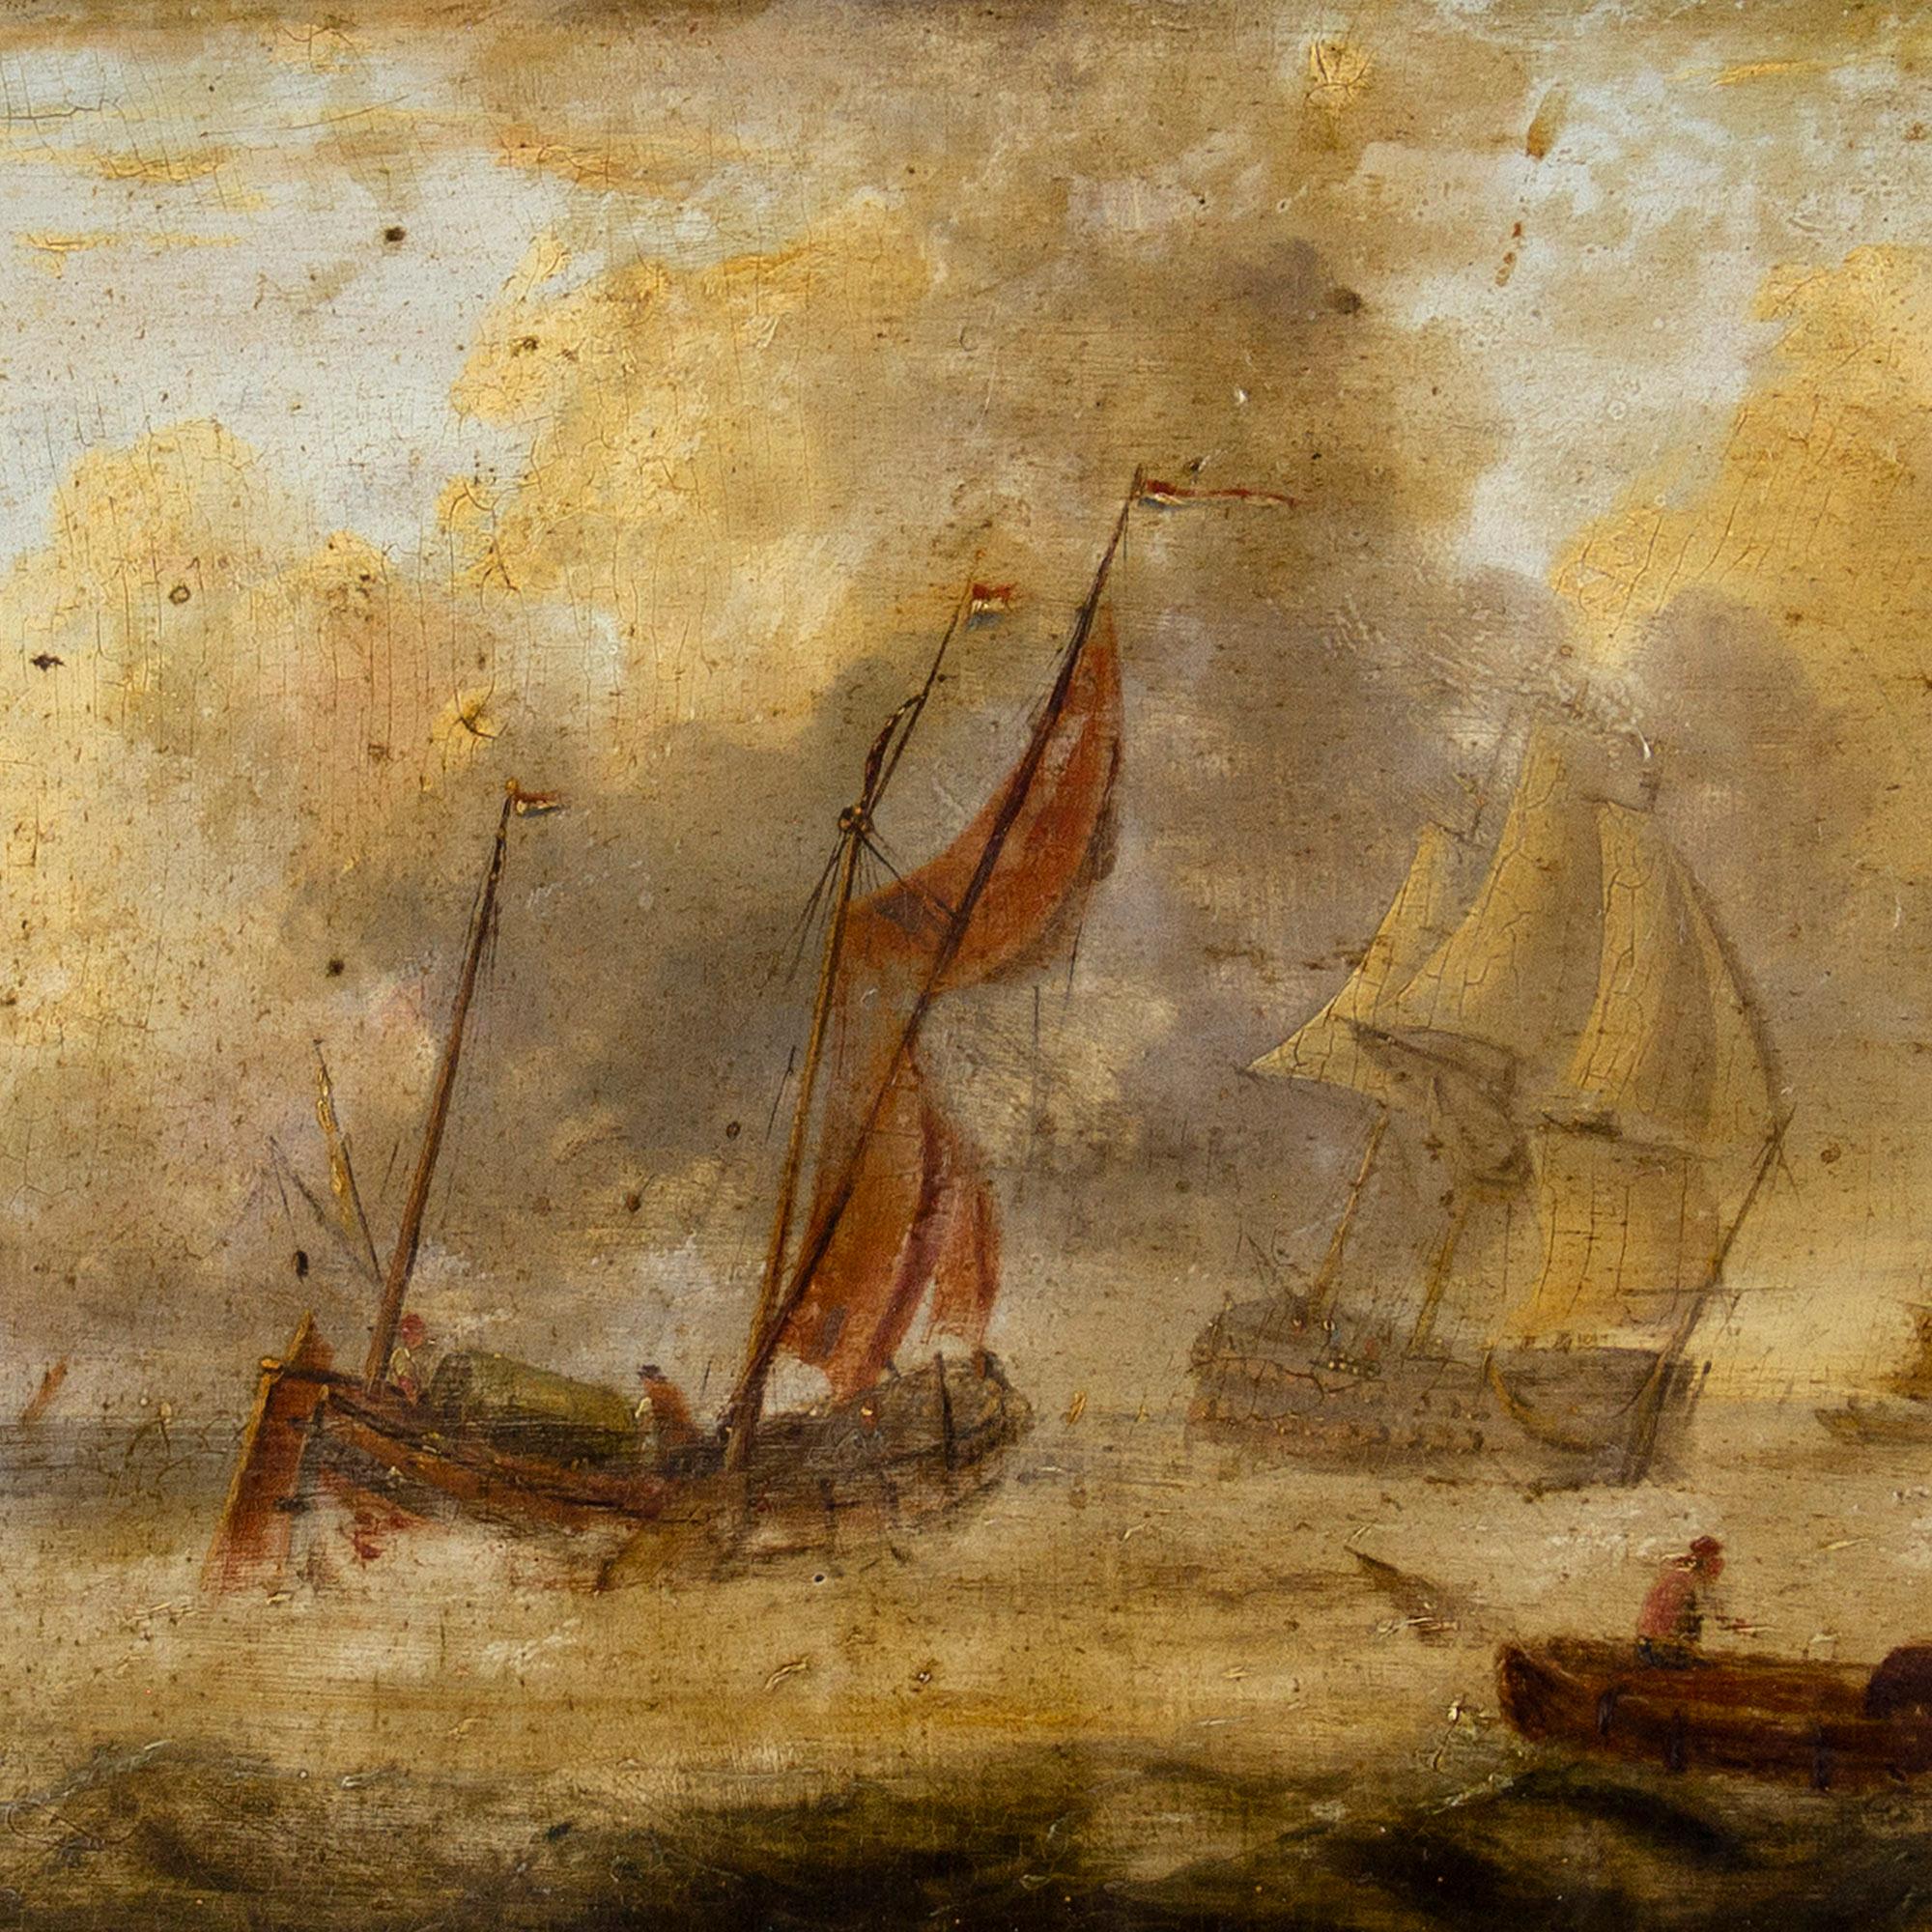 This worn 19th-century oil on panel depicts a lively marine scene from the 17th century with Dutch sailboats and a warship.

The artist has referenced a time when the Dutch navy was the envy of Europe for its scale and ferocity. Between 1652 and